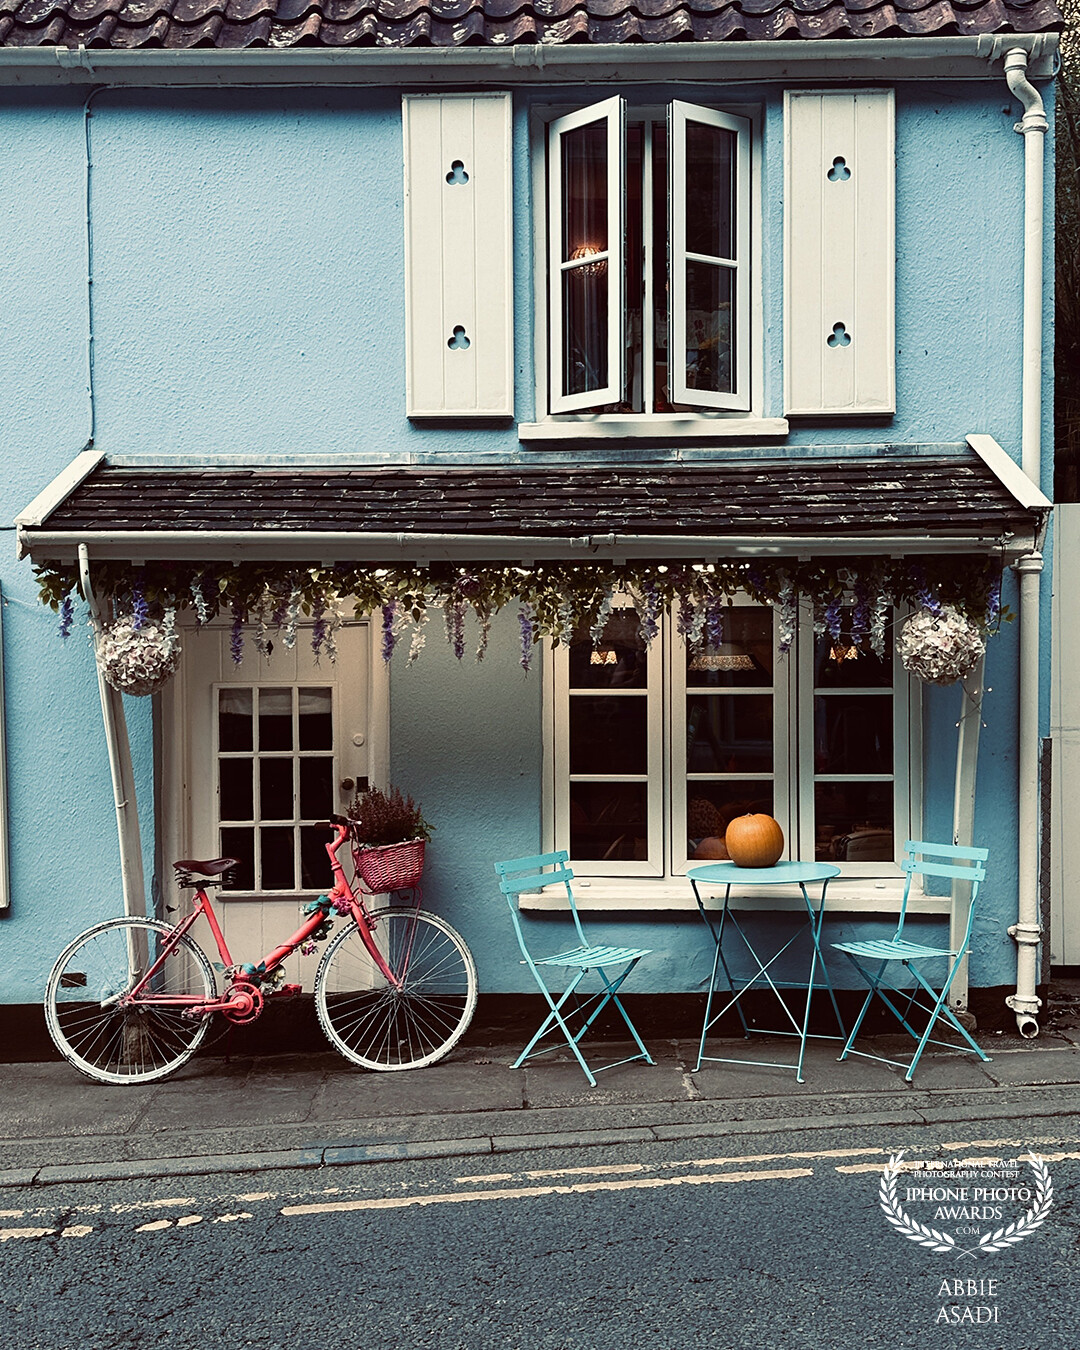 Can you just picture the connections and conversations that have happened here, me too.  A beautiful quaint shop front in Cheddar Gorge.